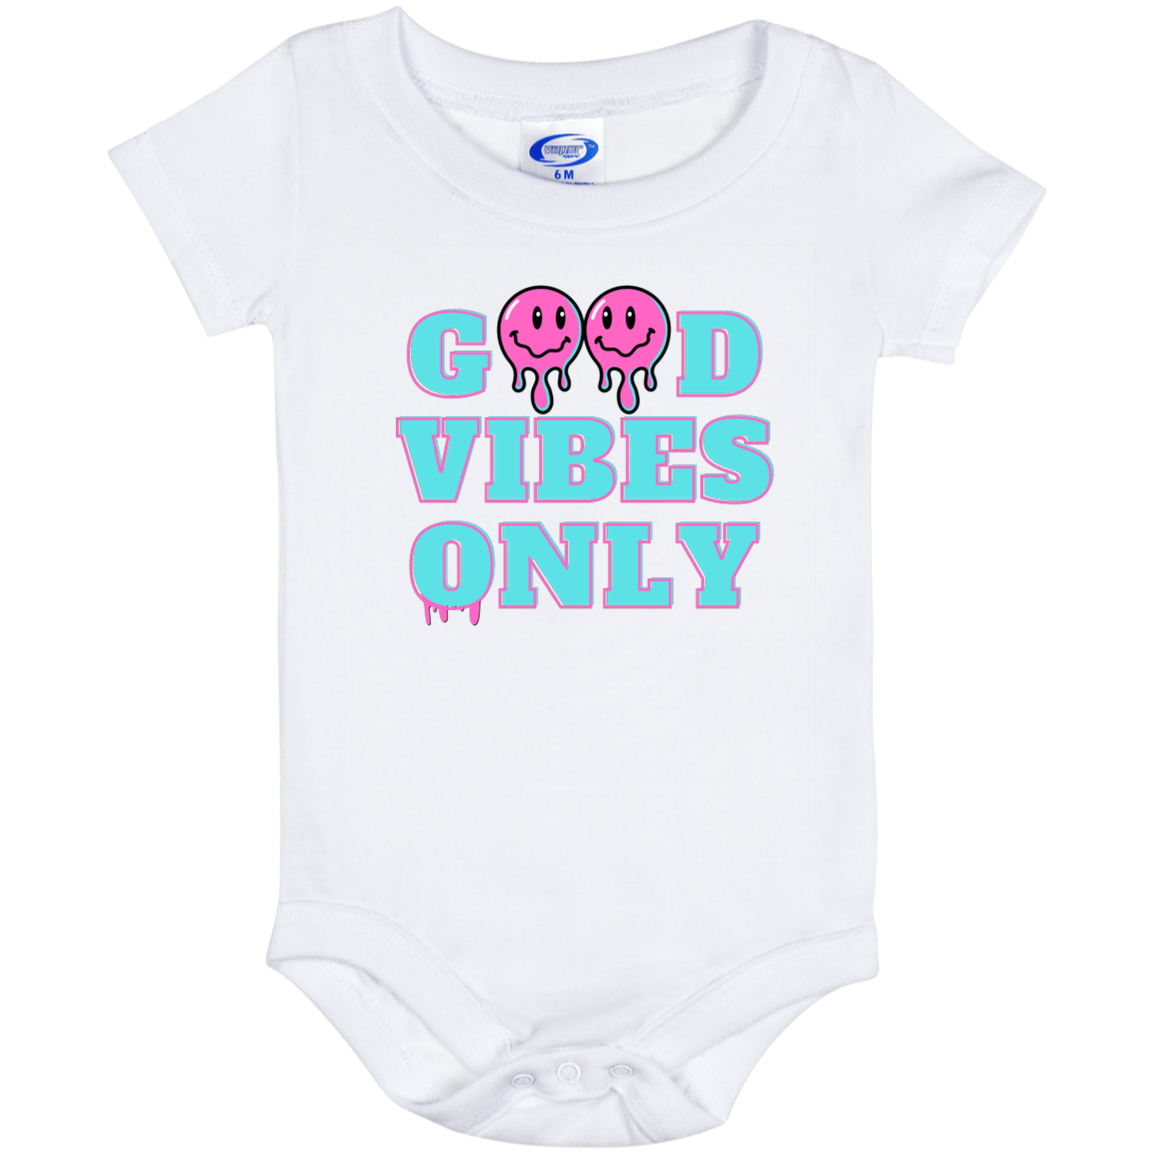 Good Vibes Only - Unisex Baby Onesie's 6, 12, & 24 Month